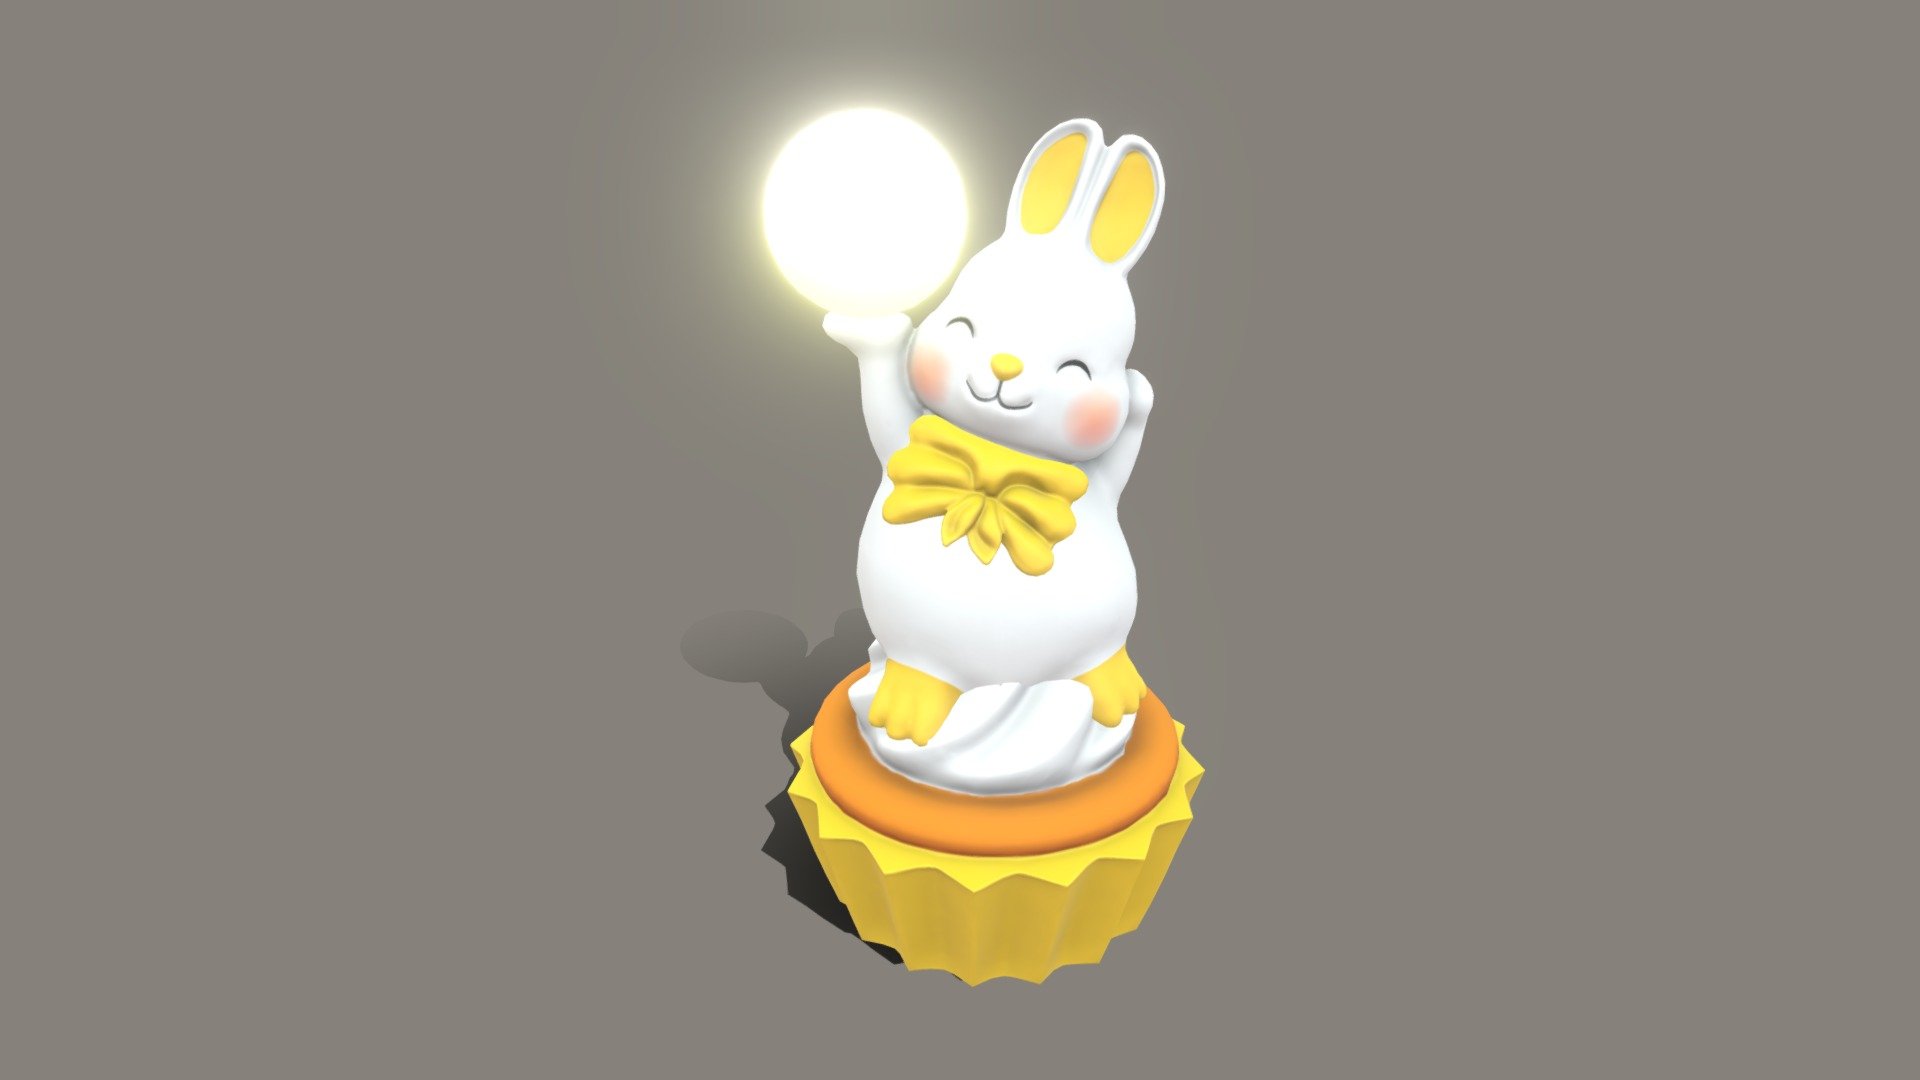 Welcome

This is the presentation of my work. The model witch you can see is made as a low poly, stylized and textured asset.

This asset pack contains:

Cute Bunny Standing Light.

Technical information:

Texture - 2048 x 2048

Everything together Bunny Standing Light - 11658 tris, 5827 faces, 5908 verts.

Just Bunny - 4584 tris, 2291 faces, 2292 Verts.

Contact details:

lukas.boban123@gmail.com

https://www.facebook.com/lukas.boban/

Thank you for taking look please consider leave like 3d model